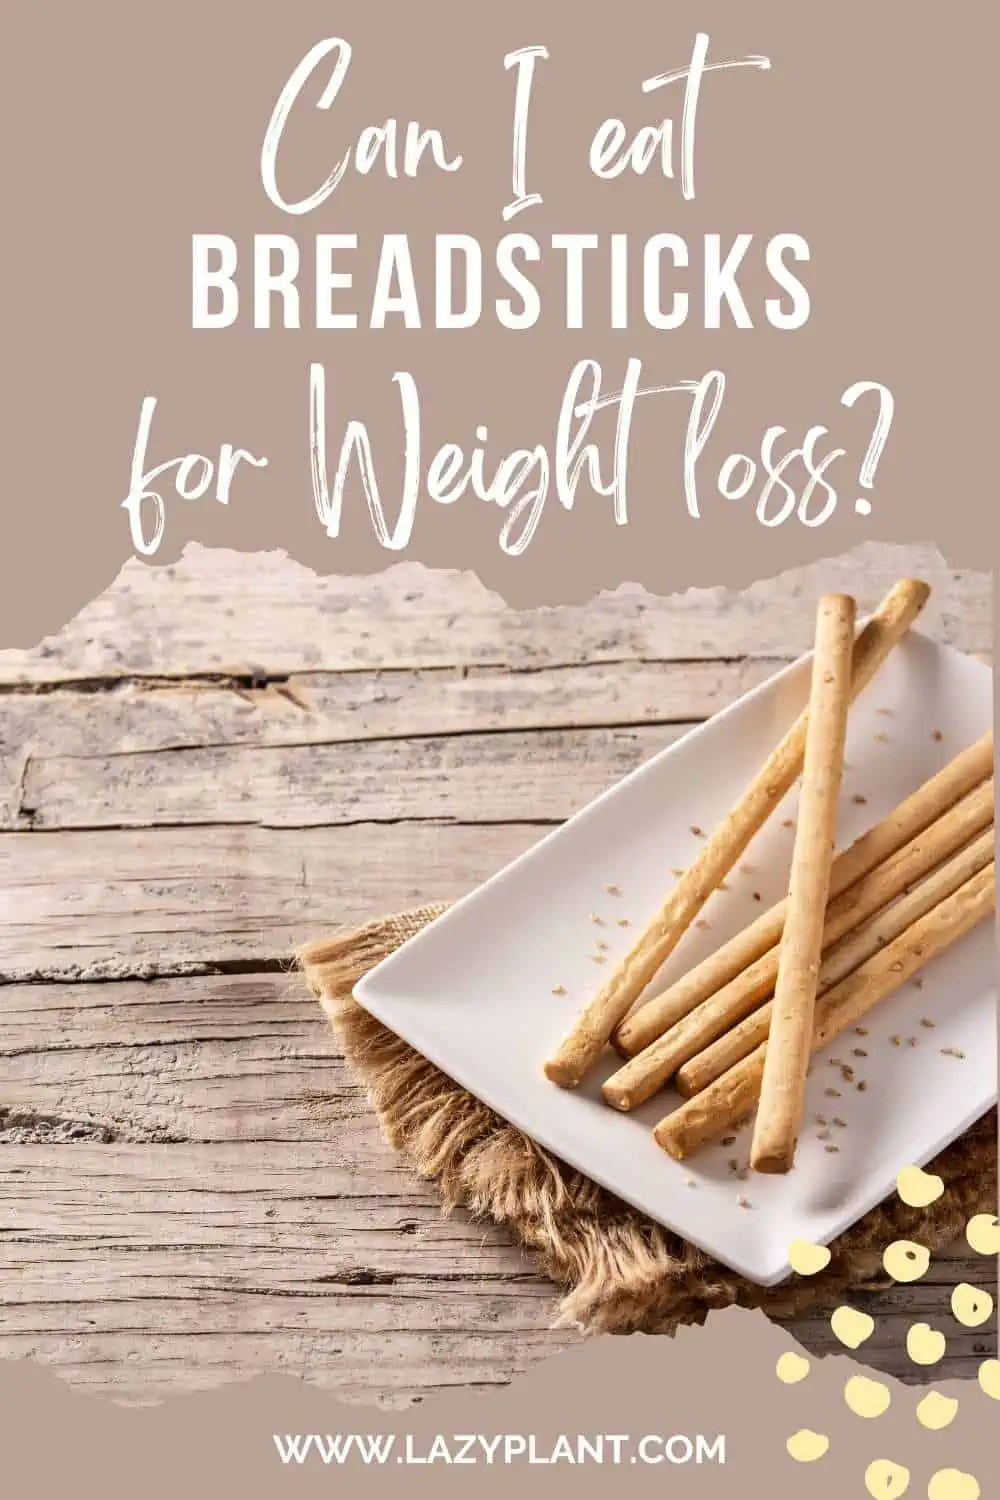 Can breadsticks make me gain weight?